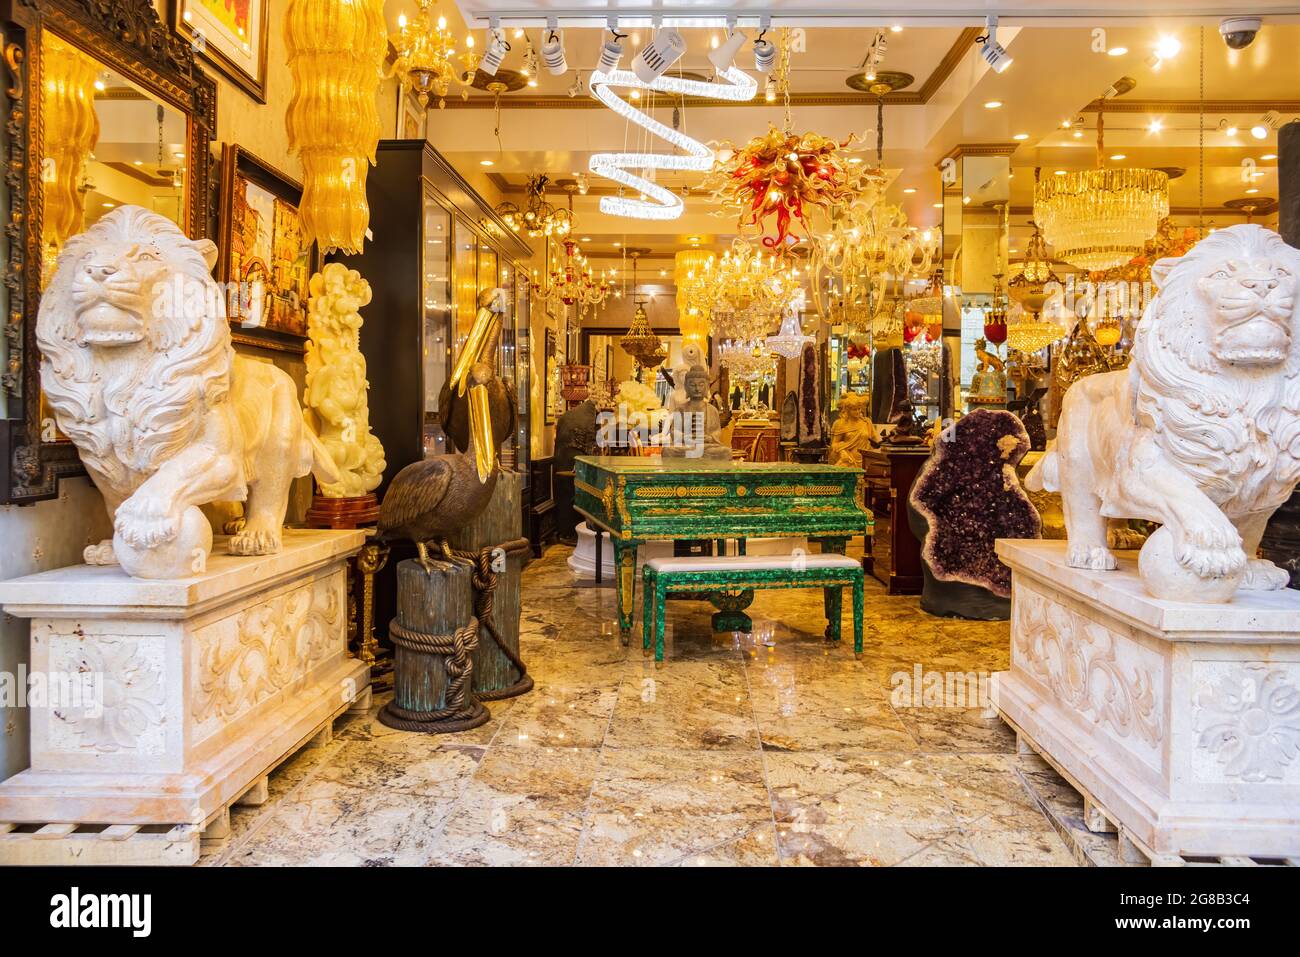 San Francisco, MAY 20, 2021 - Interior view of Chinese style lighting store Stock Photo